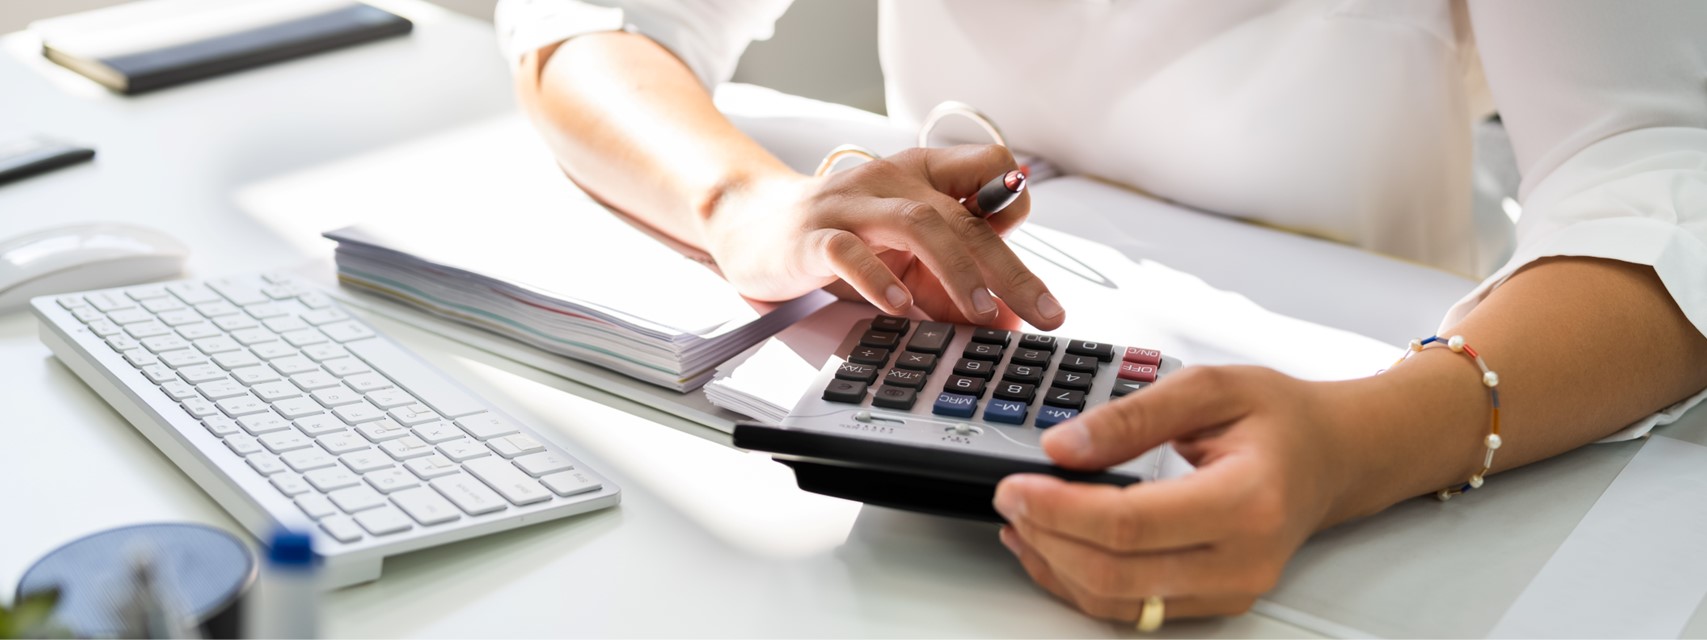 Business woman calculating tax withholding for an equity award transaction